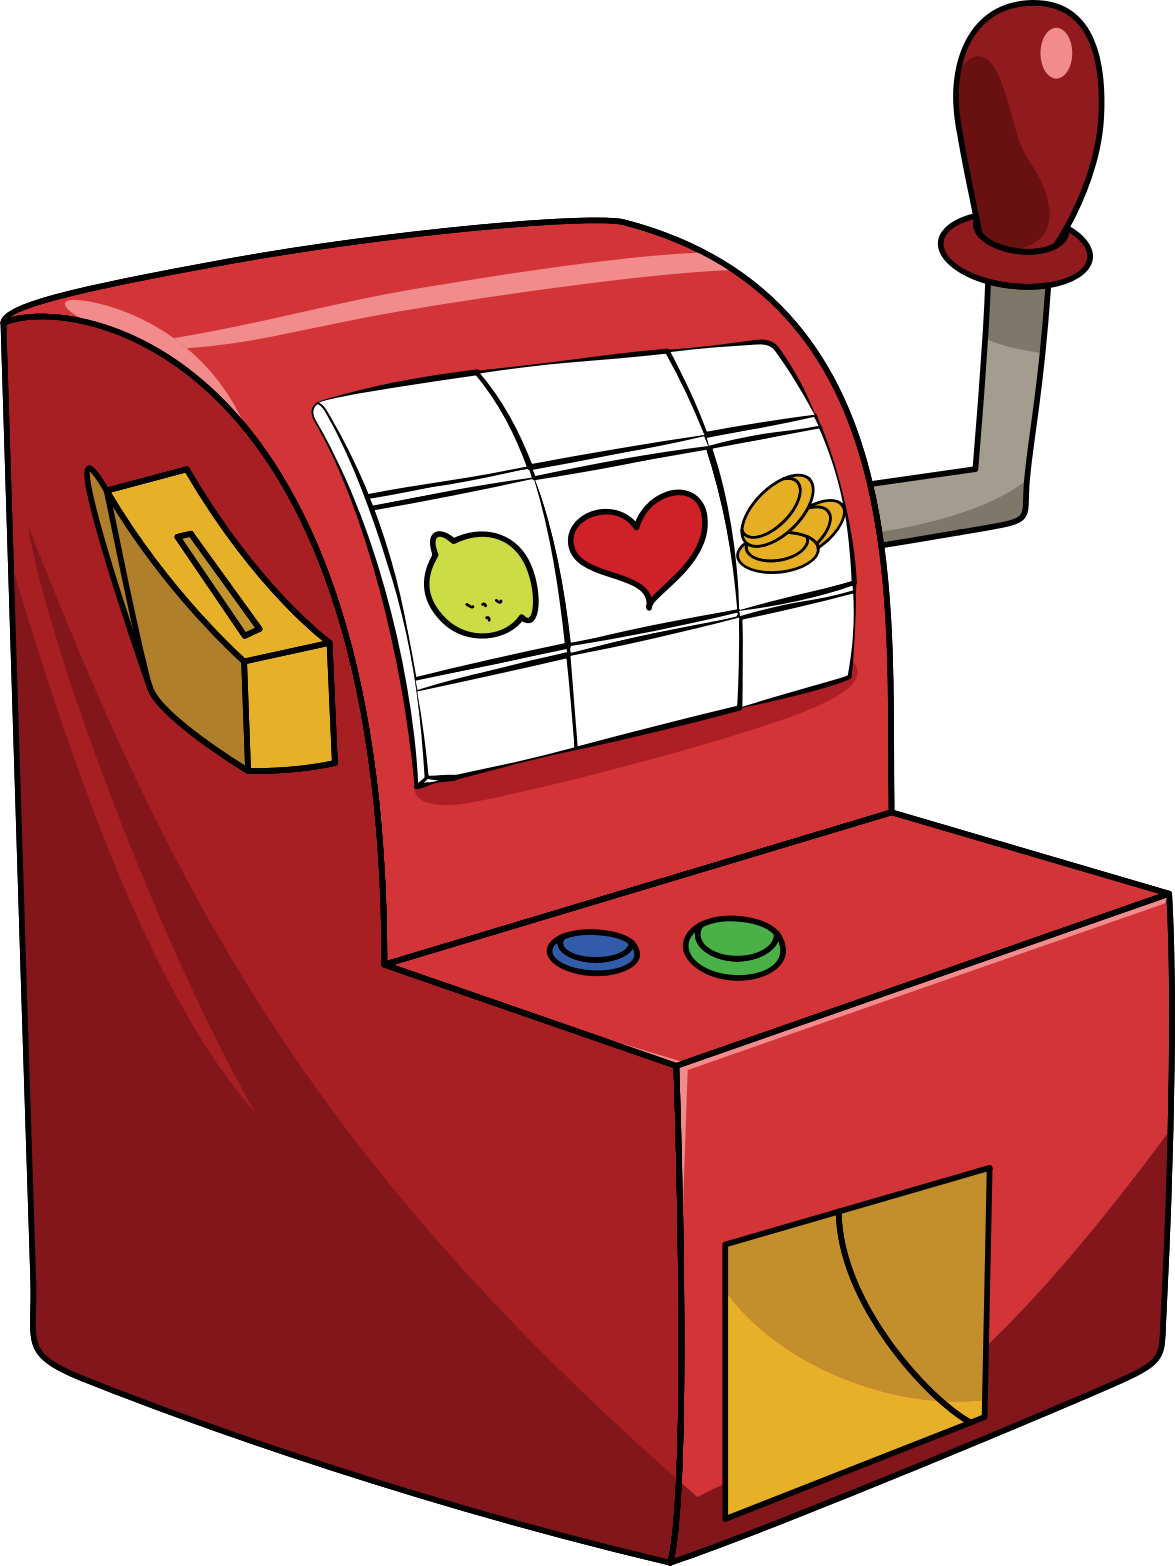 Clip Arts Related To : clip art slot machine. 